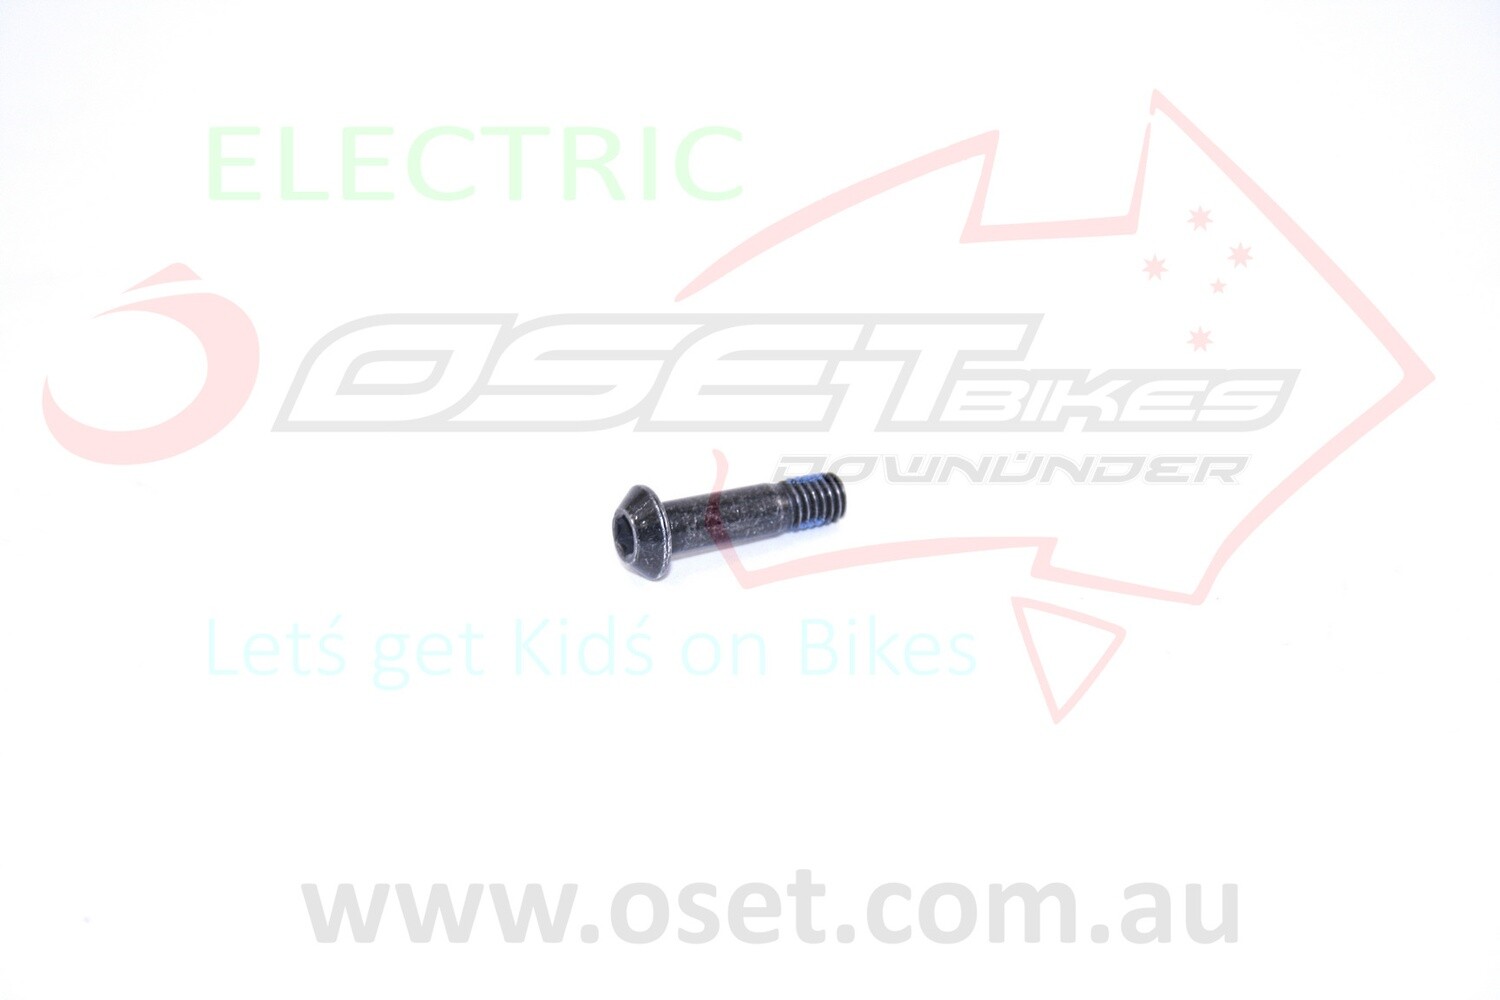 Bolt - Side Stand - All OSET bikes